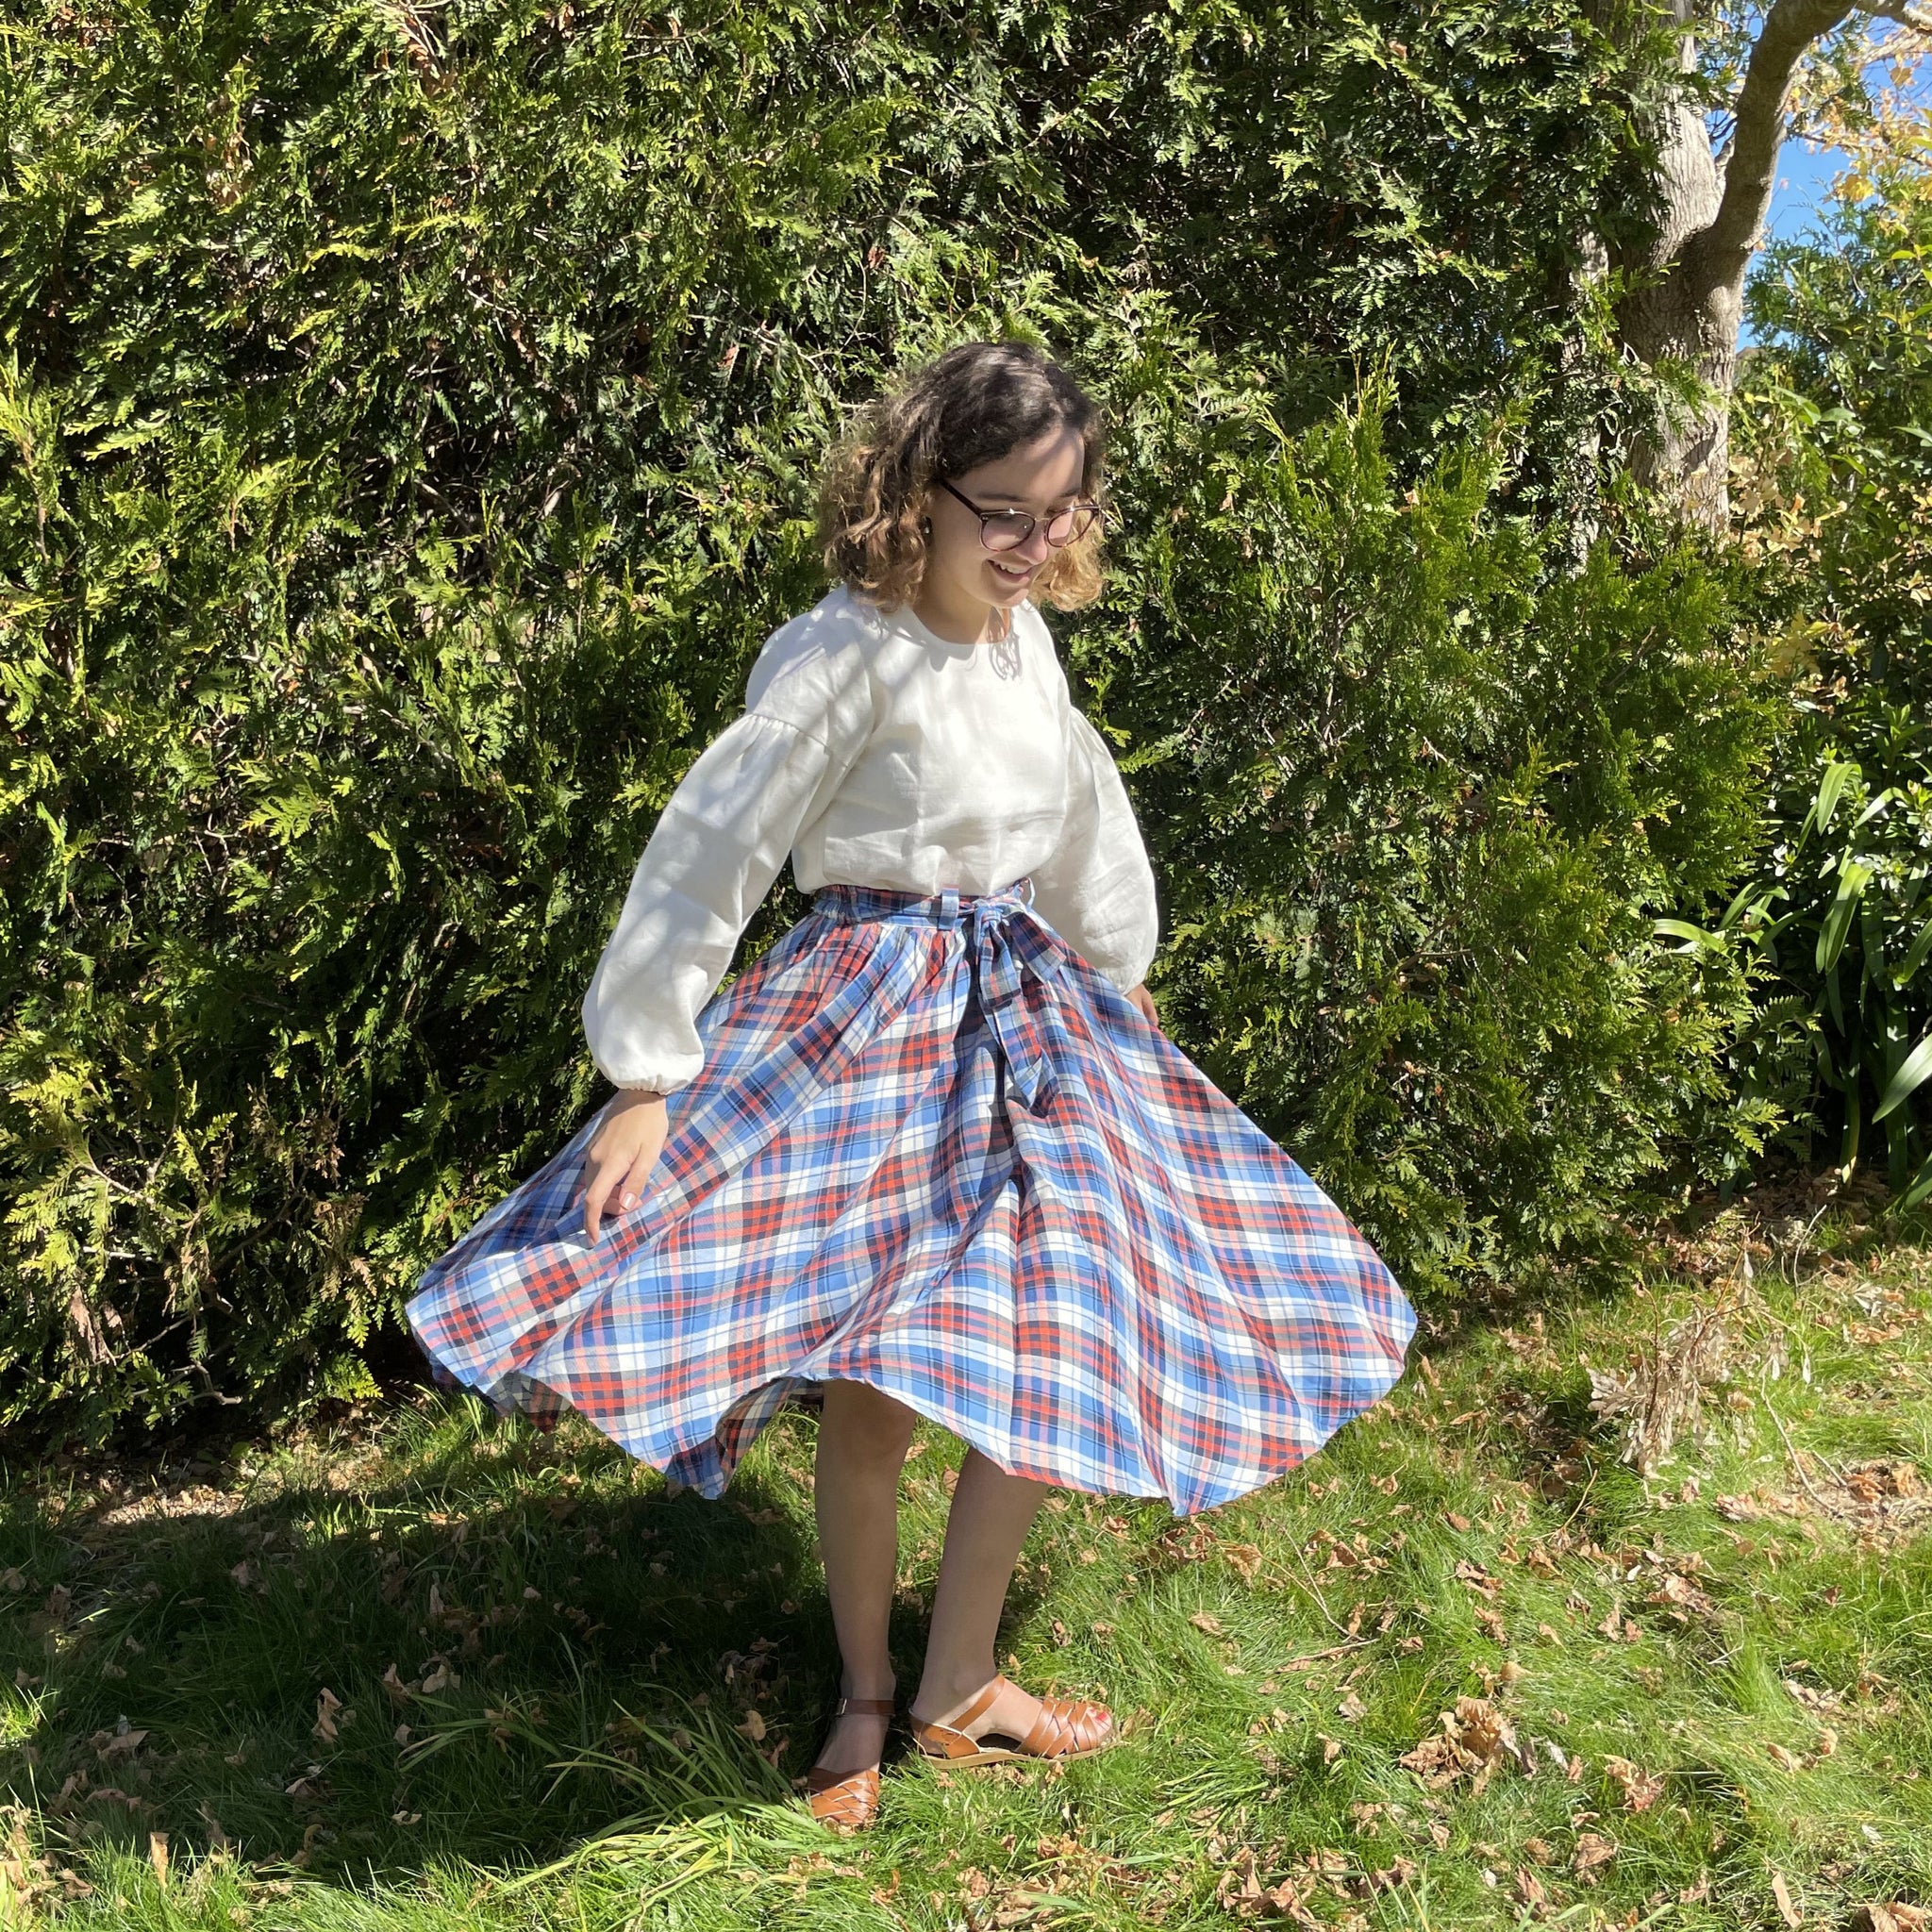 White Sweater and Plaid Skirt–Too School Uniform? – Teach in Style